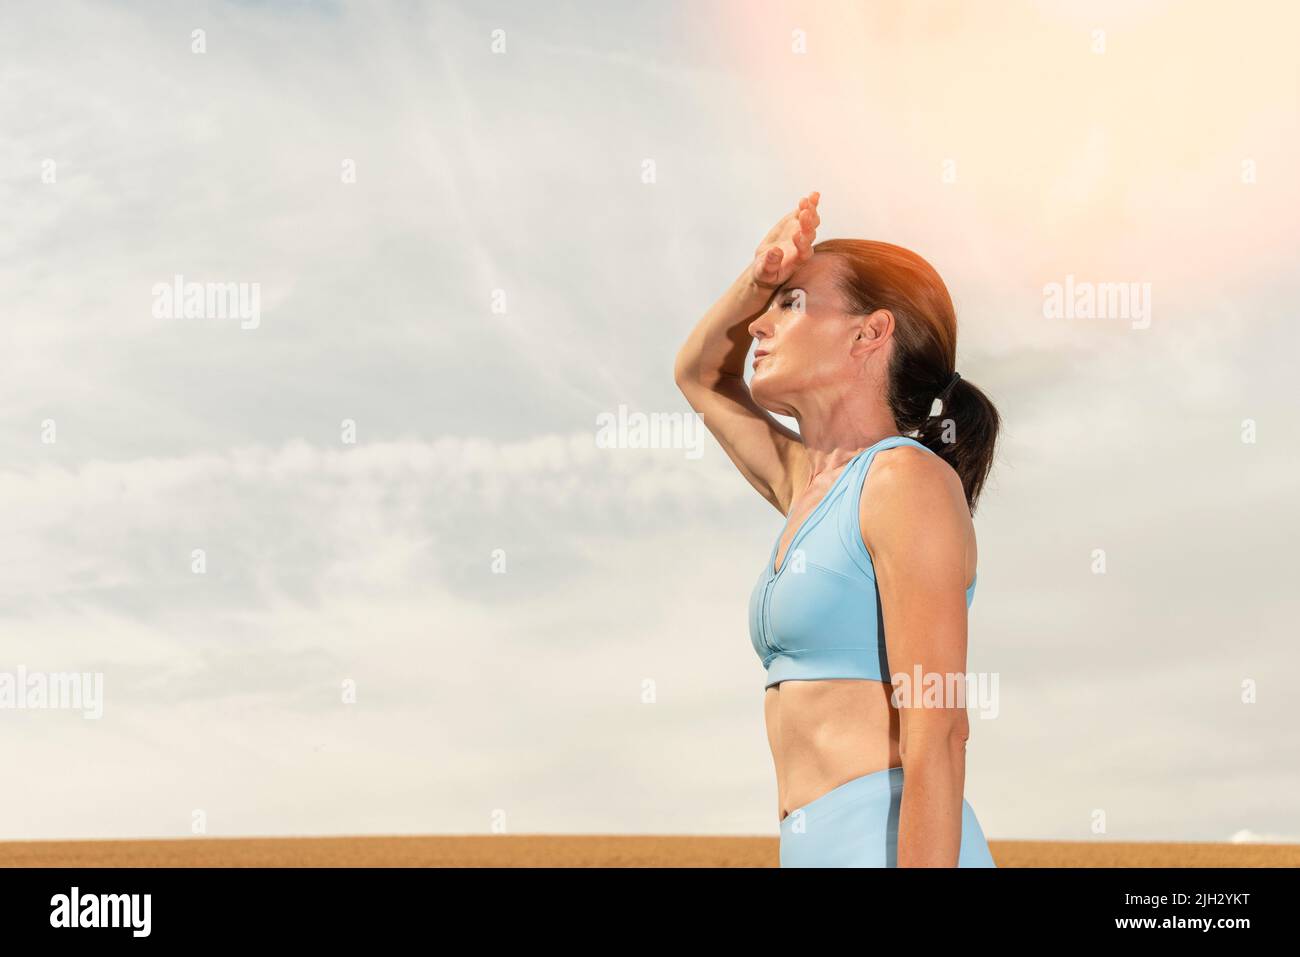 Sporty woman outdoors in the sun, suffering with the heat Stock Photo